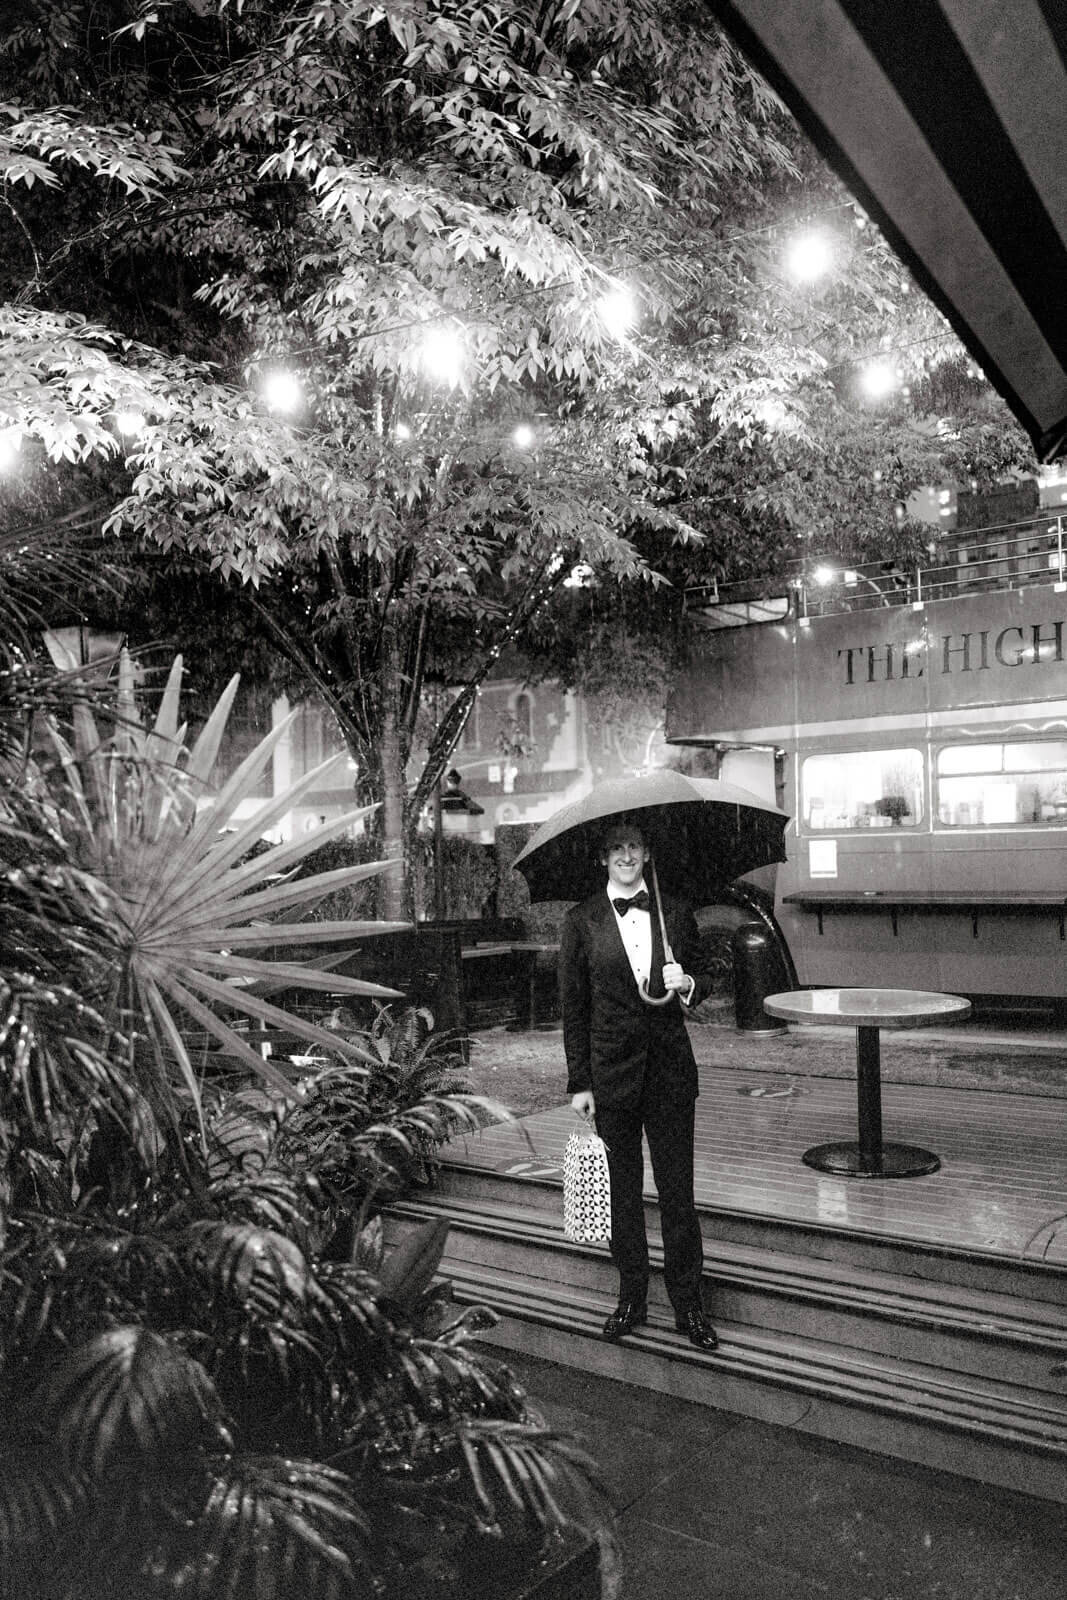 The groom is holding an umbrella in the outdoor dining area while raining, at The High Line Hotel Chelsea, NYC. Image by Jenny Fu Studio